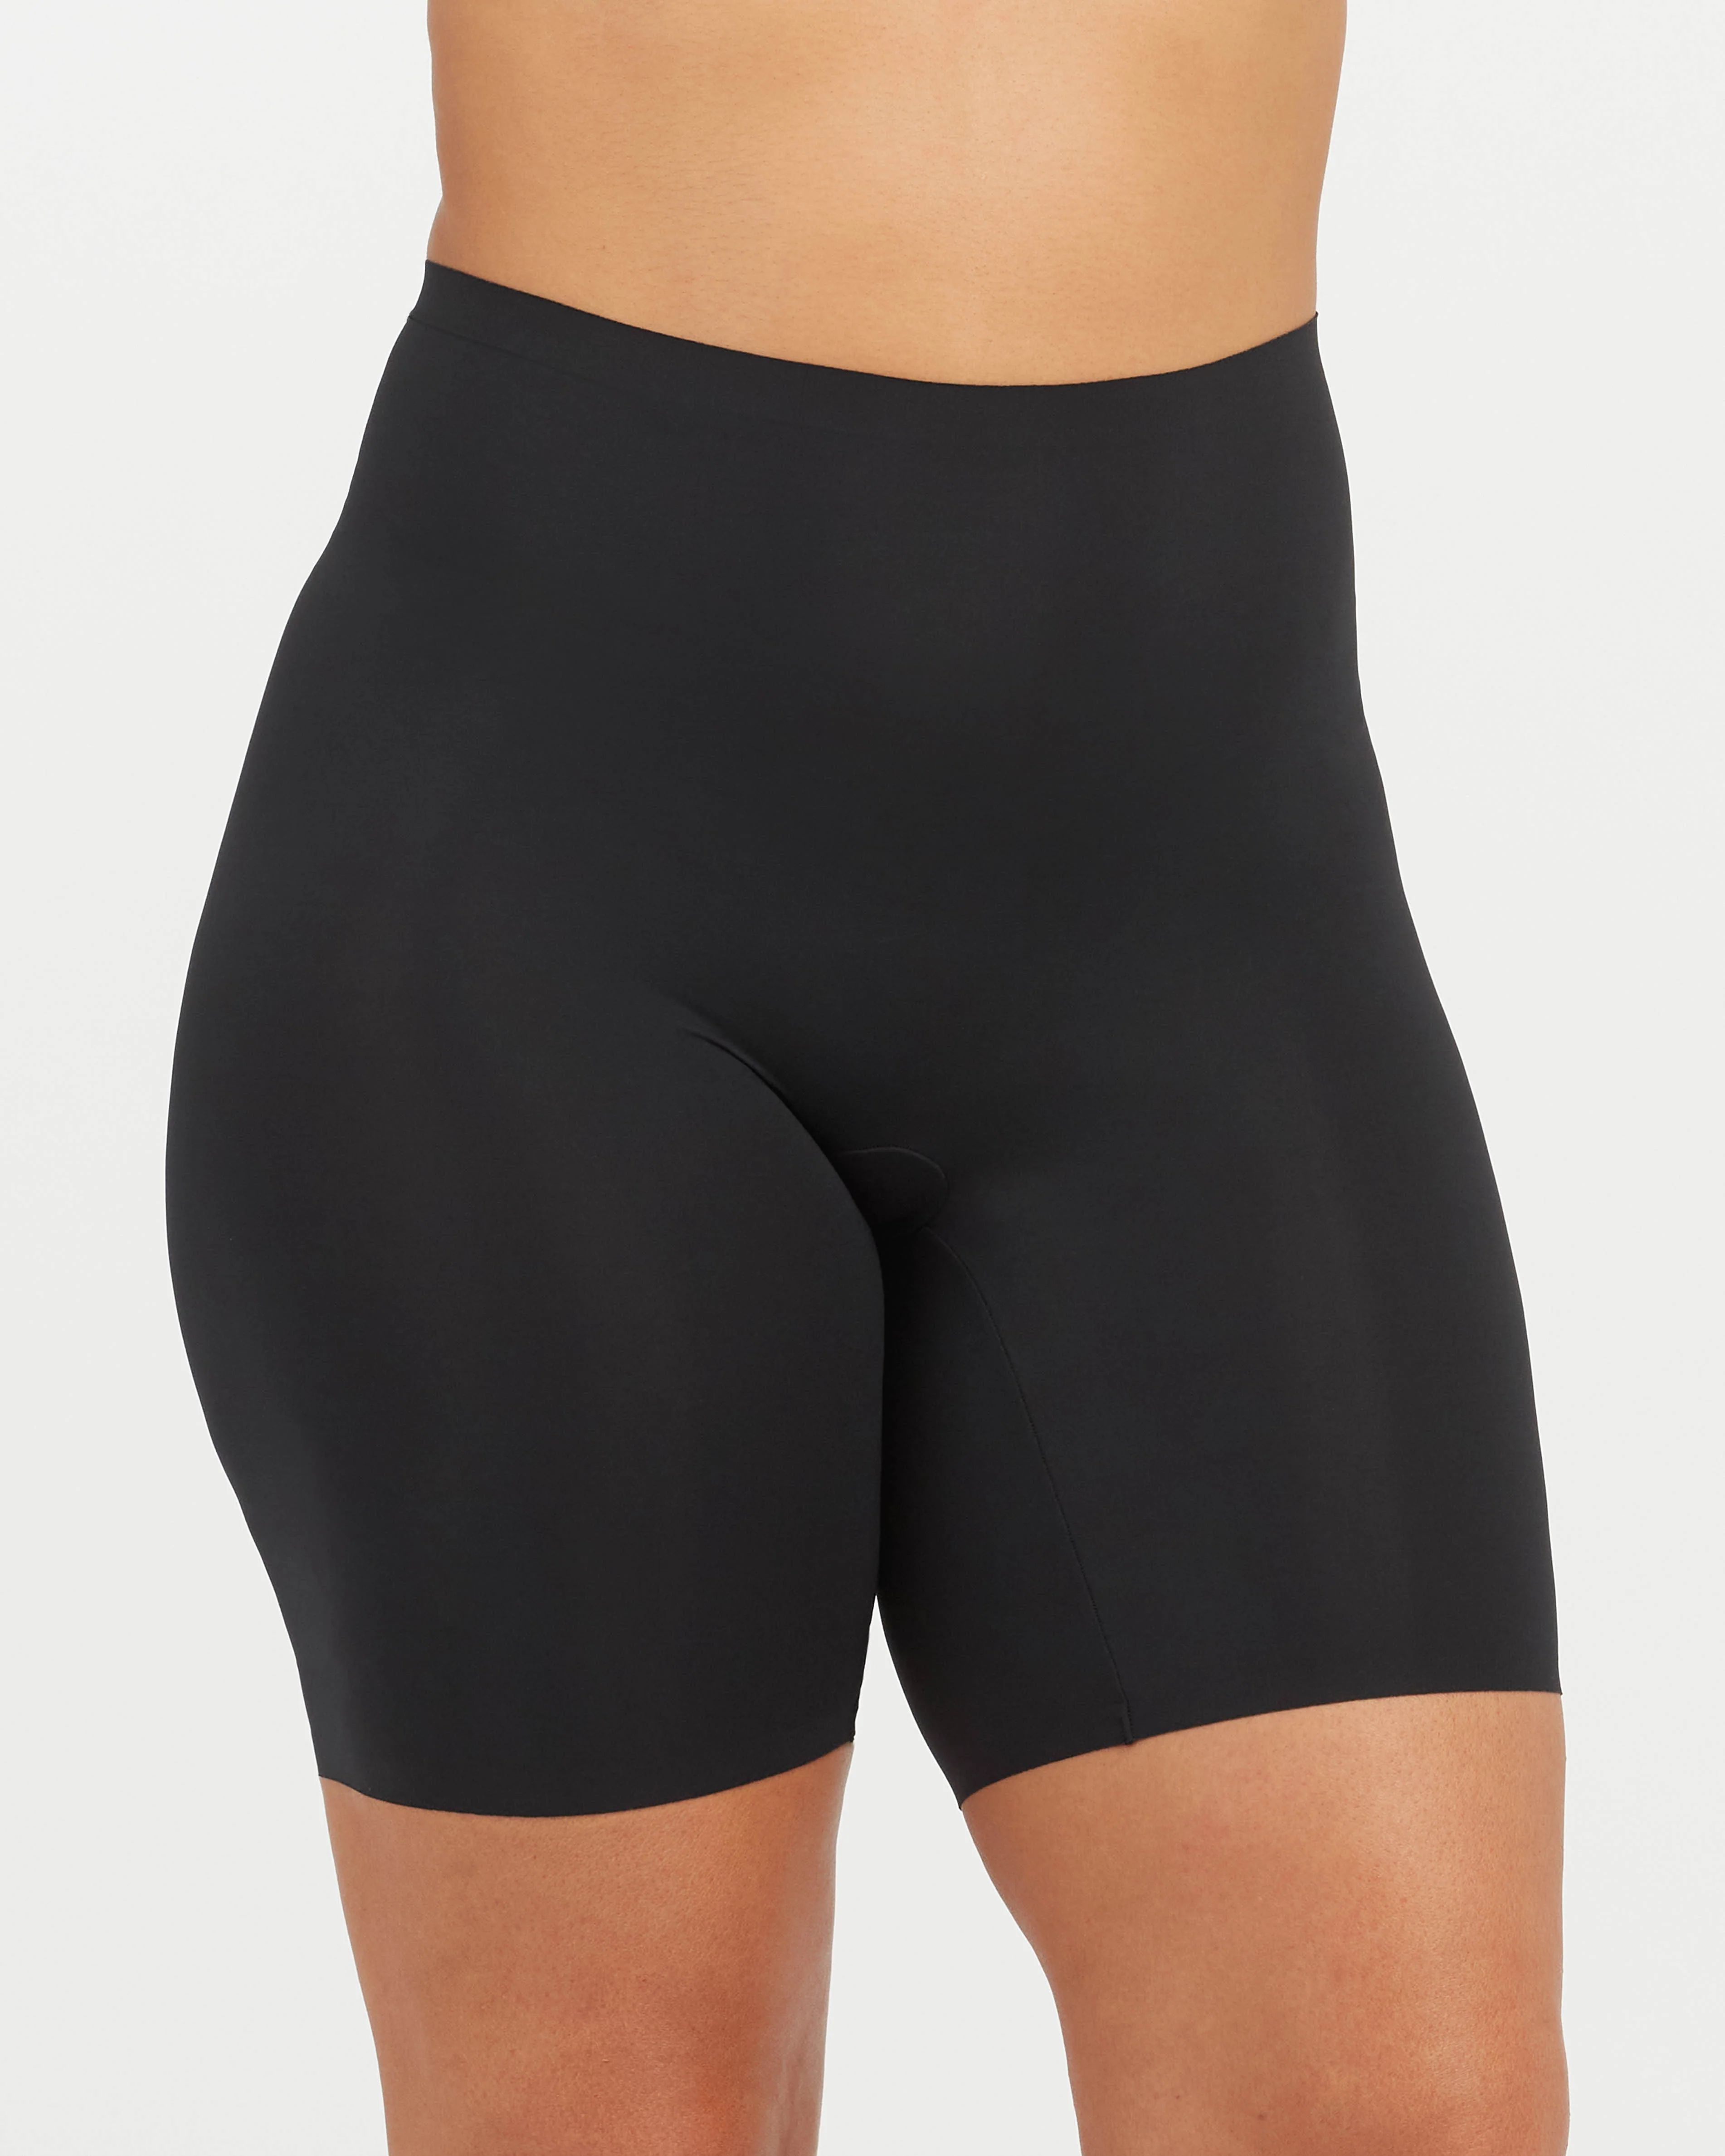 Fit-to-You Superlight Smoothing Mid-Thigh Short | Spanx